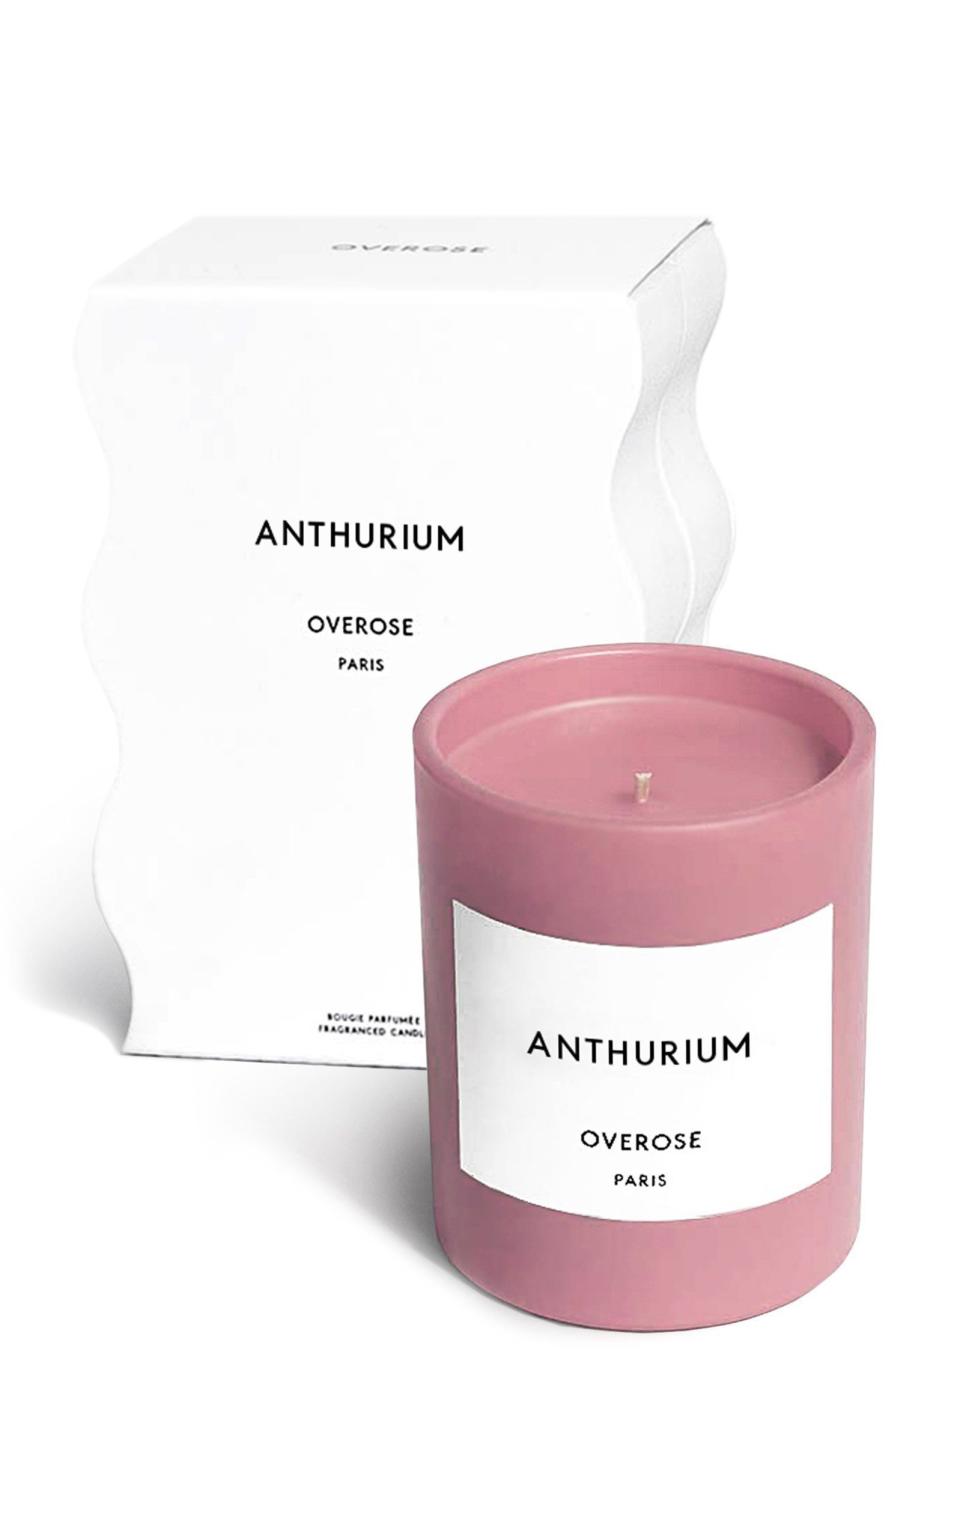 8) Pink-Anthurium Scented Candle, 220g